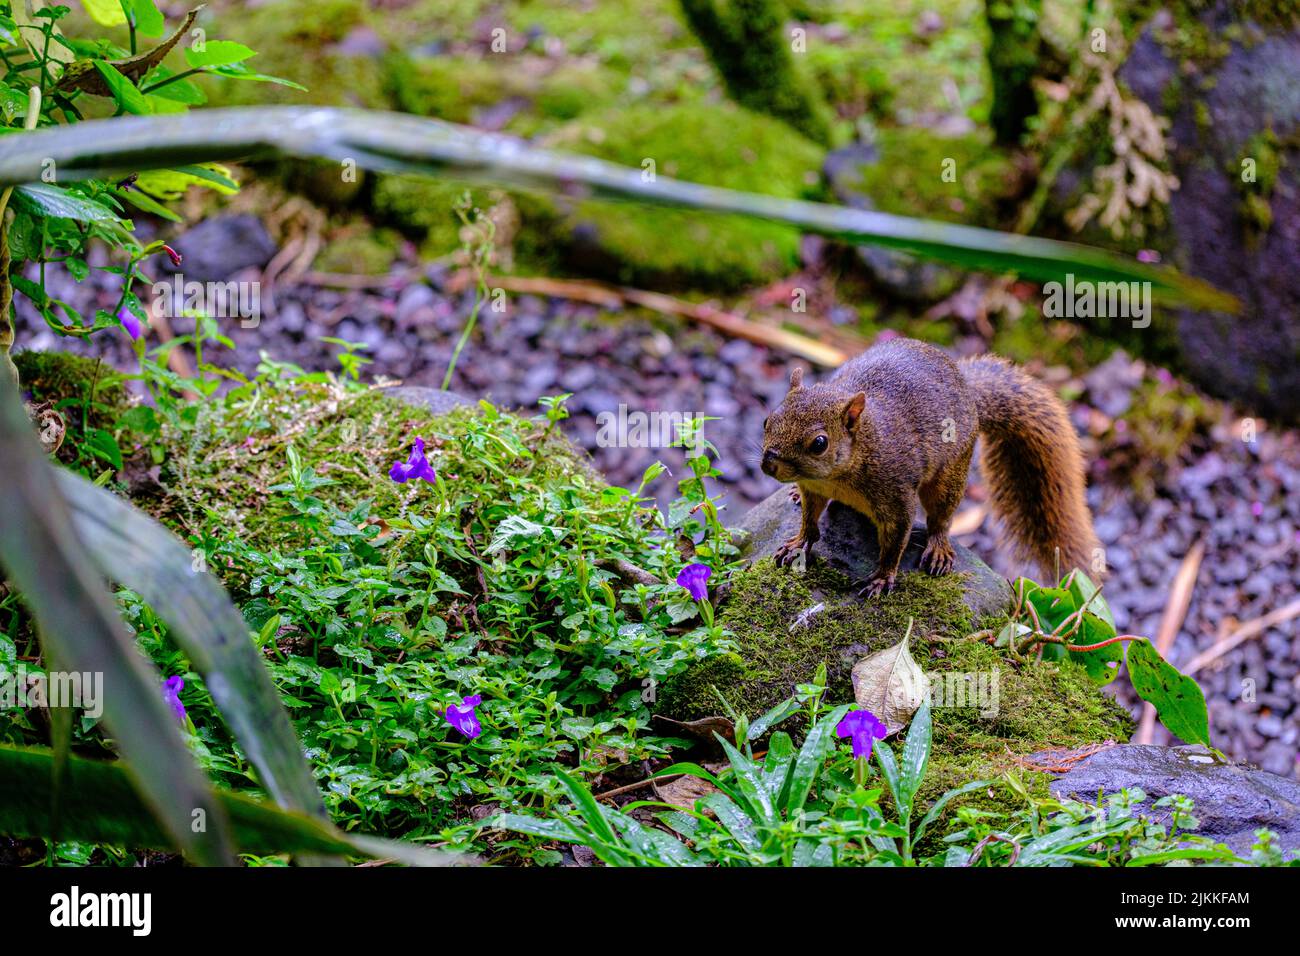 A beautiful shot of a red-tailed squirrel standing on a rock among green grass in the forest with purple flowers in the blurred background Stock Photo